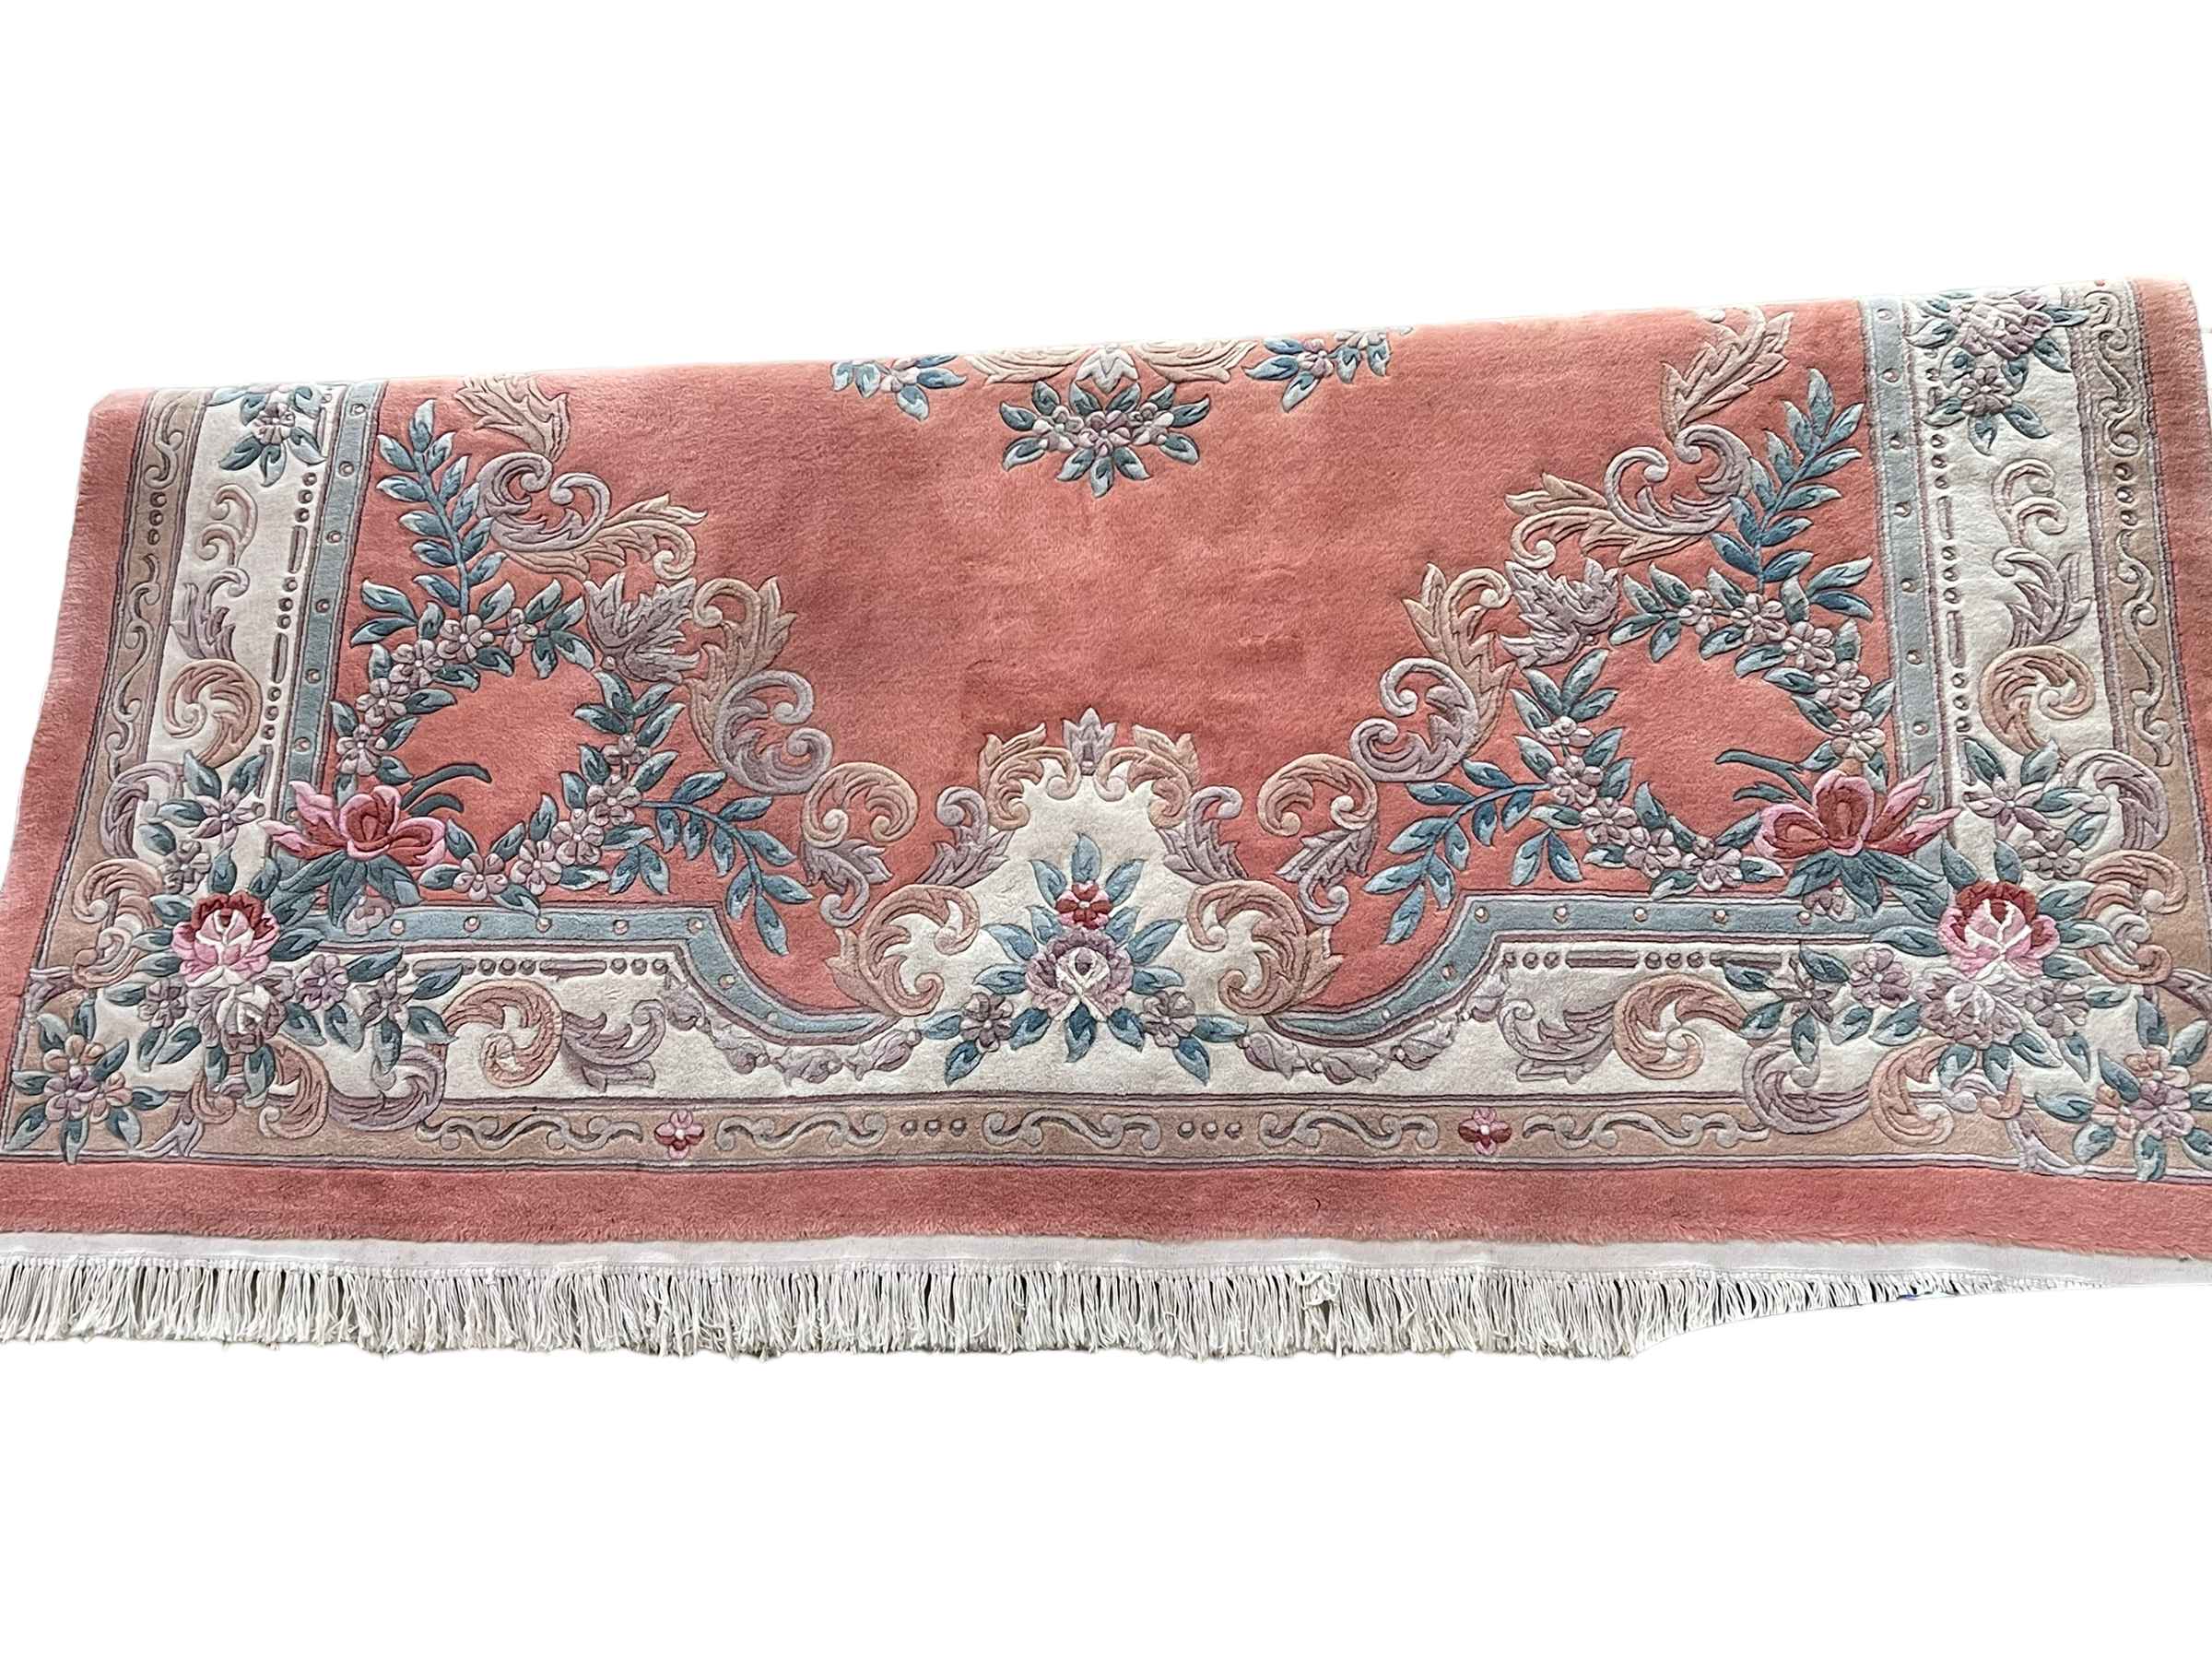 Floral patterned Chinese carpet, 3.80 by 2.78.